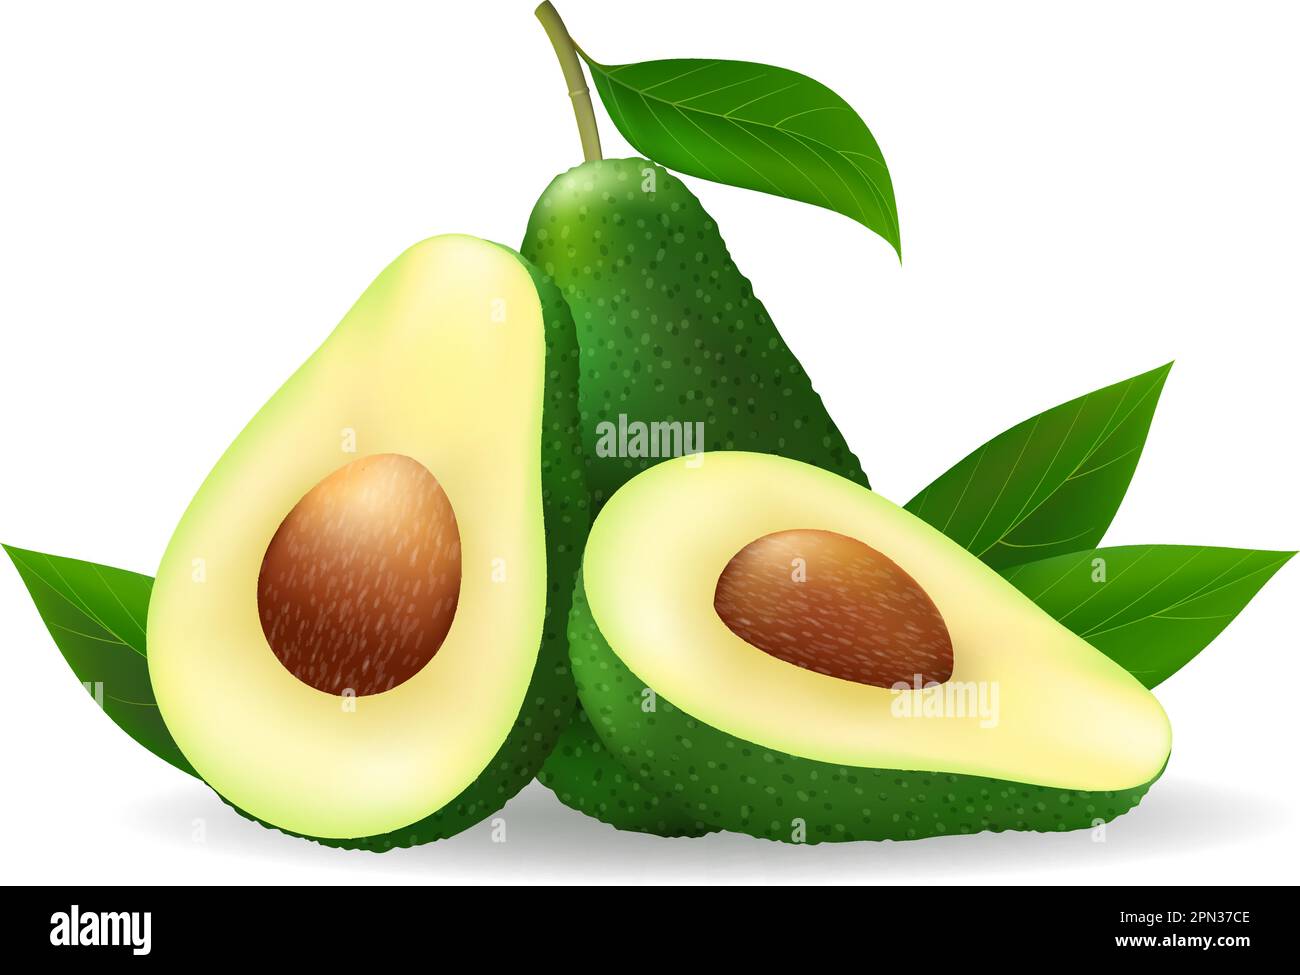 Avocado isolted fruits on white Stock Vector